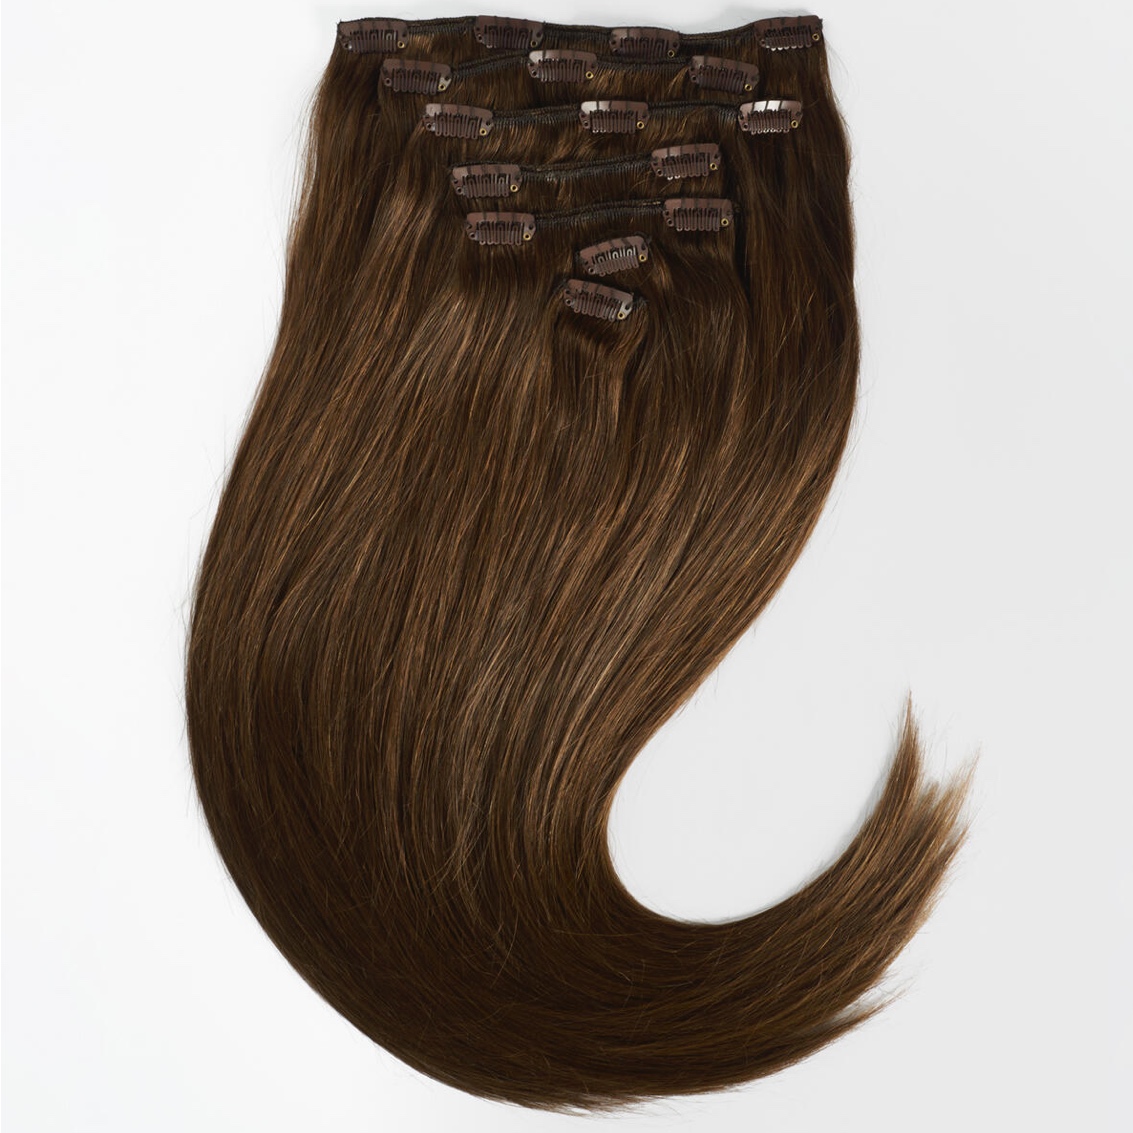 Brown Clip In Human Hair Extensions 20 inch 100grams | Sixtythree Hairstudio